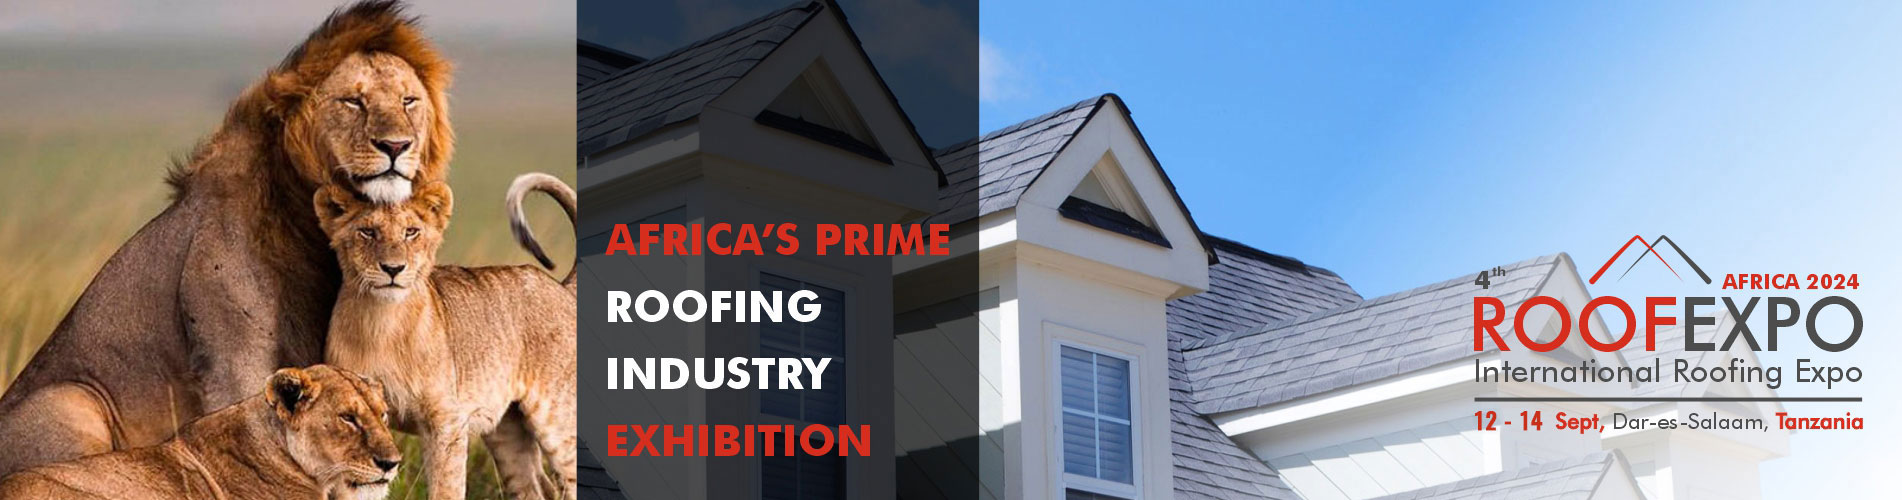 Roofexpo Tanzania 2024 - International ROOFING INDUSTRY Show Africa